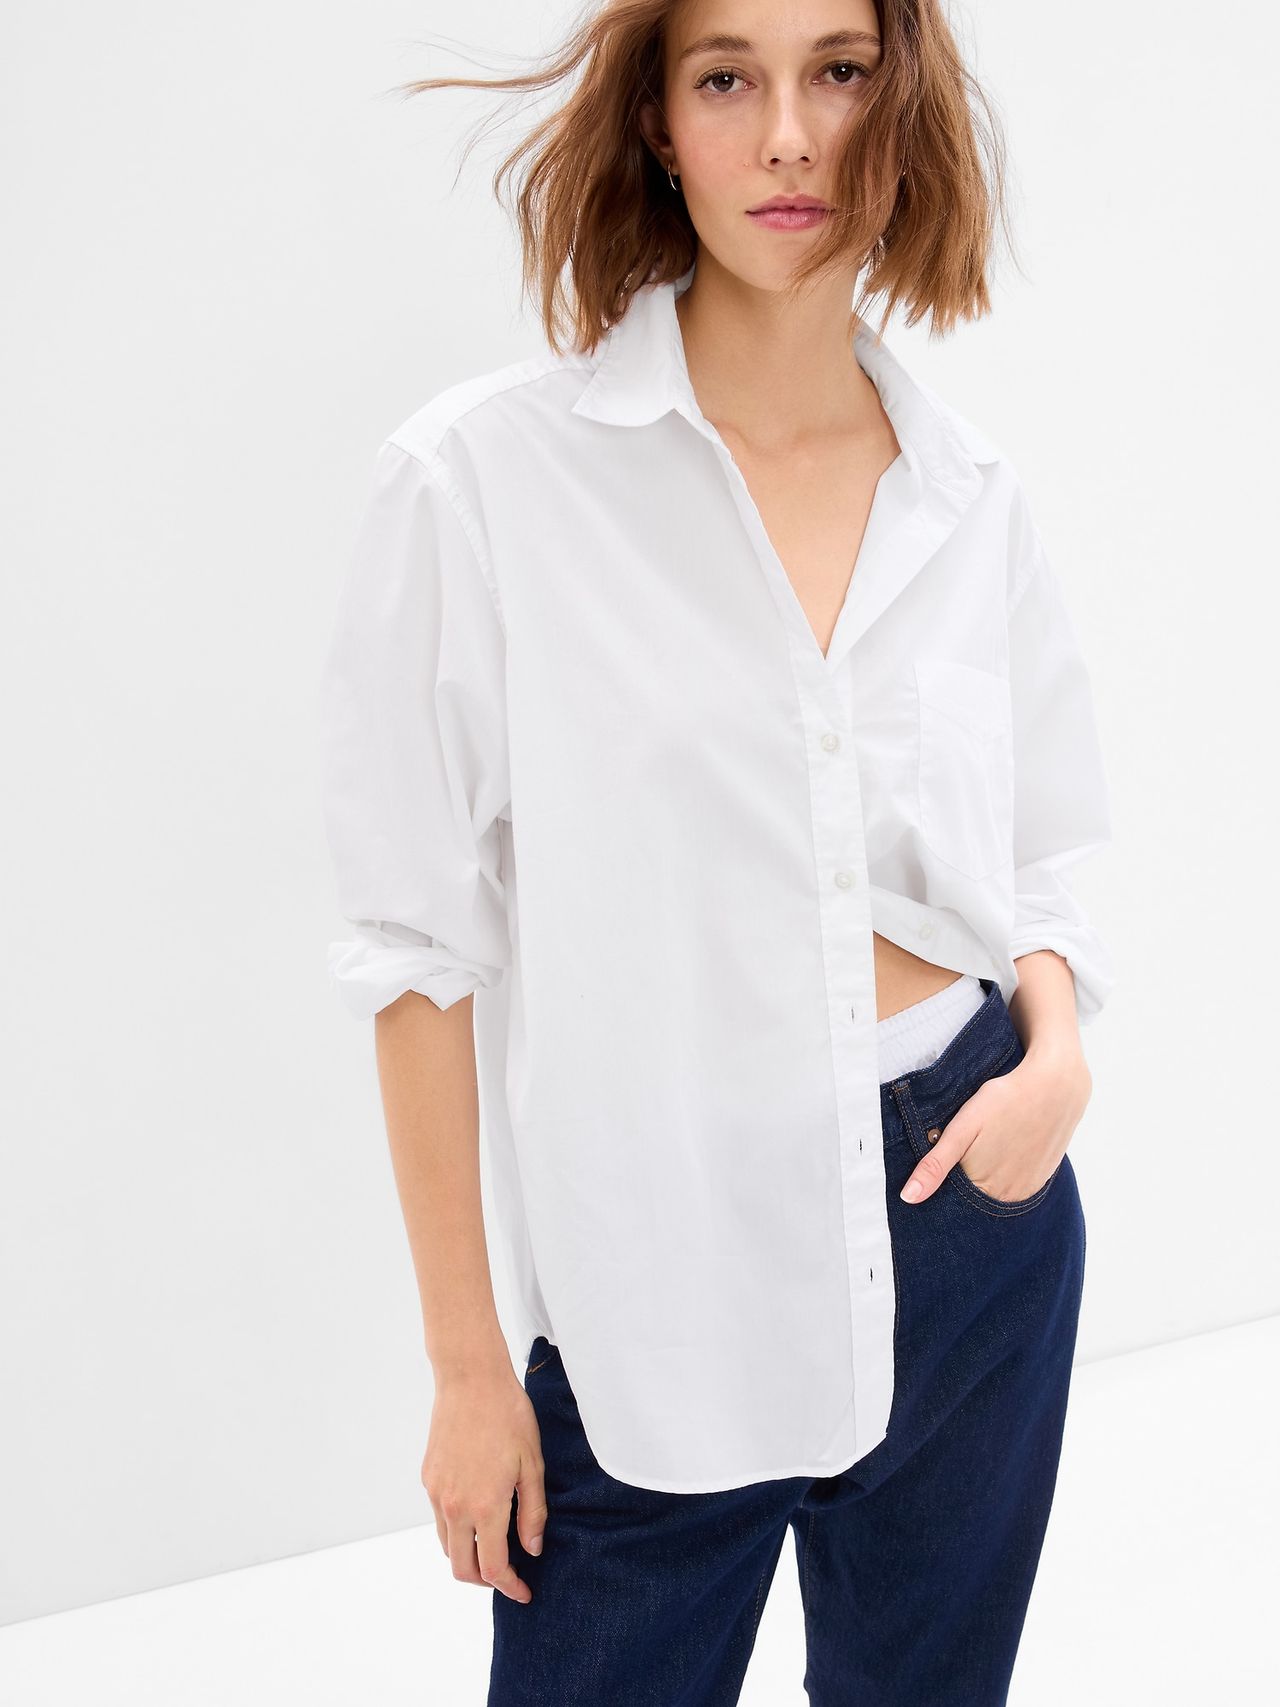 5 Items That Look Chic With a White Button-Down Shirt | Who What Wear